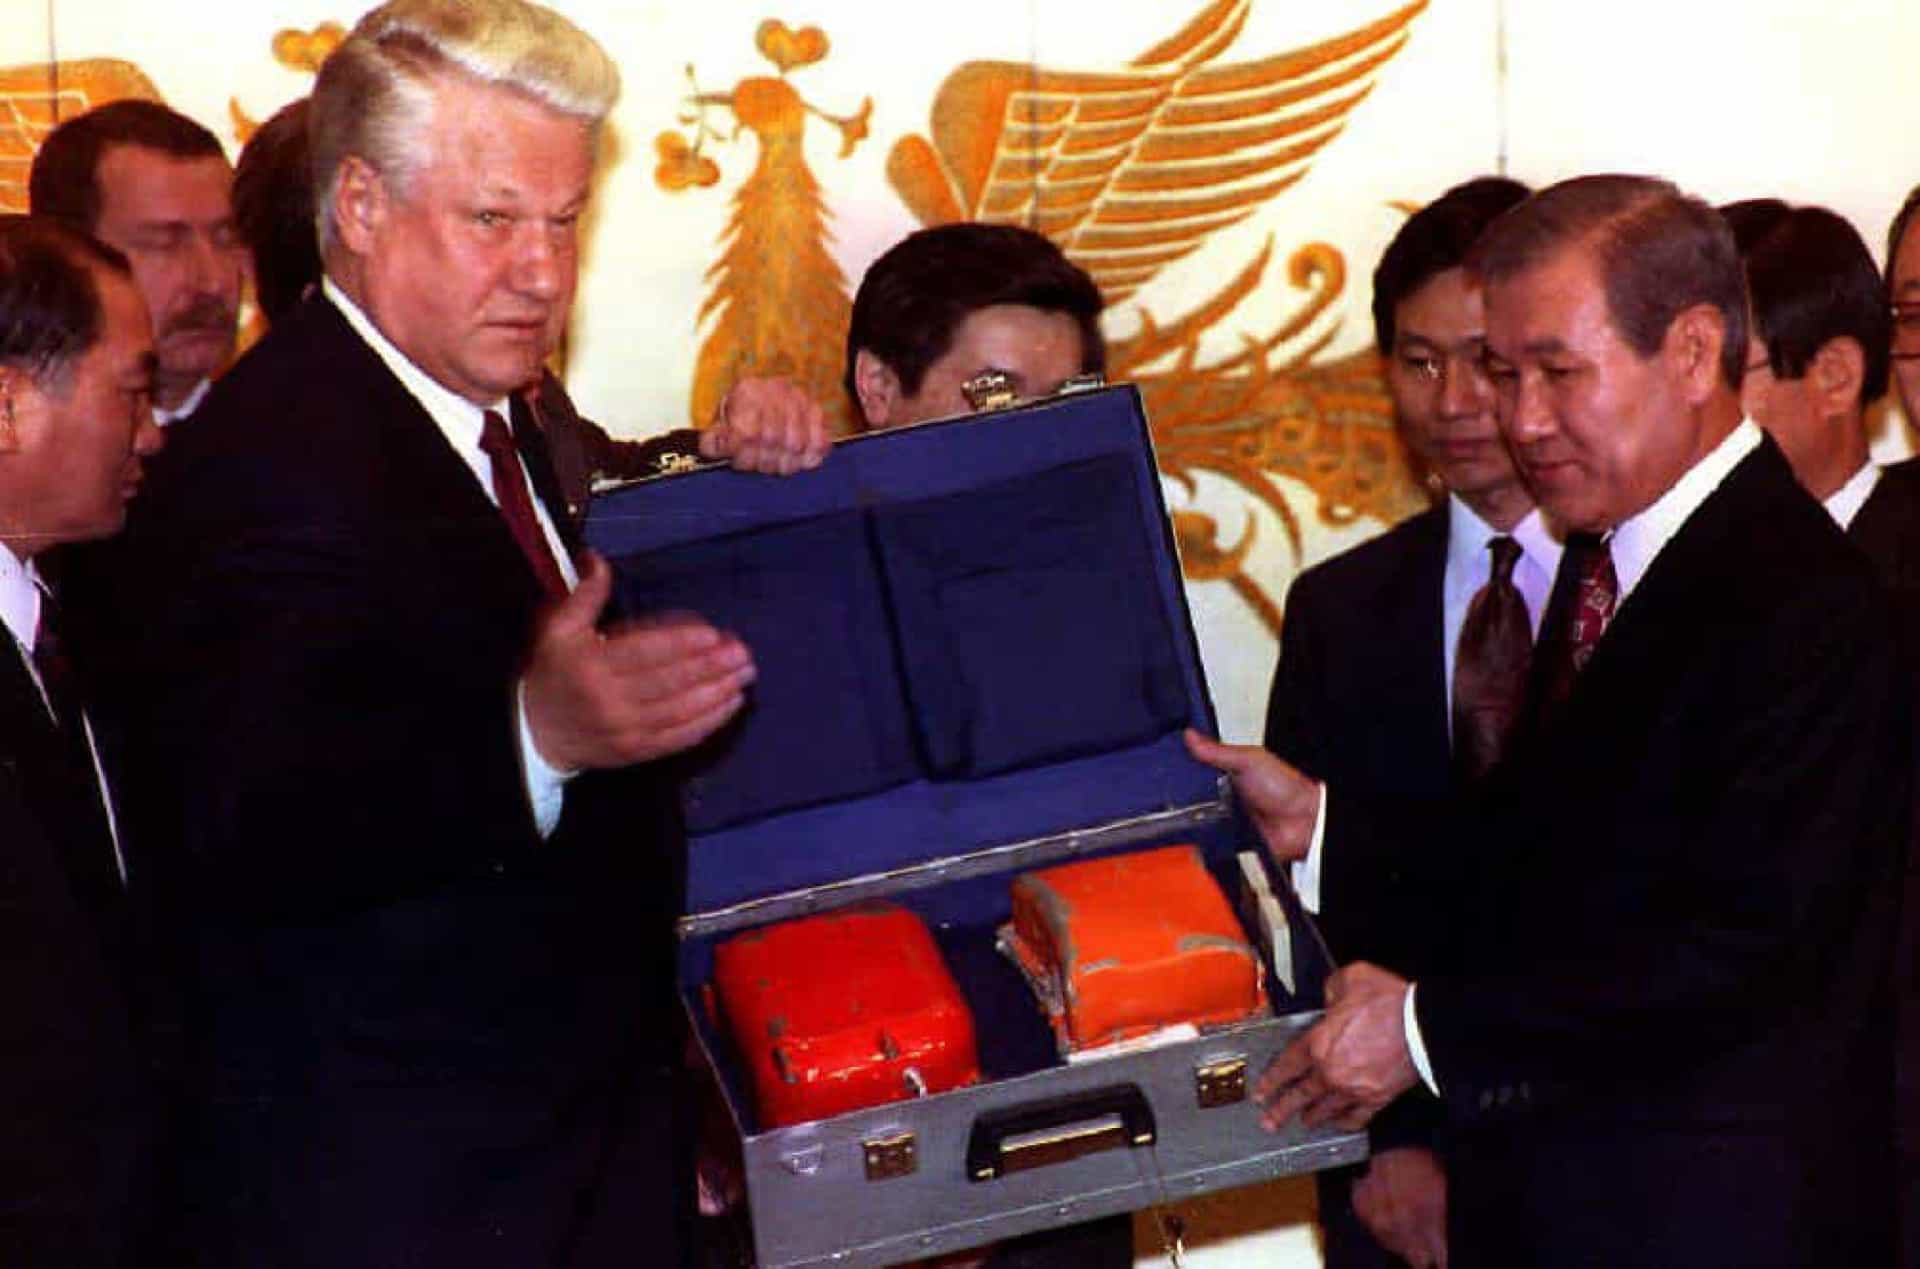 <p>In an incident that provoked global condemnation, a Korean Air Lines flight from New York to Seoul was shot down in 1983 by interceptor aircraft for violating Soviet airspace after the passenger plane veered off course. This prompted the United States to allow worldwide access to its Global Positioning System, or GPS. The Korean jet's flight recorders were secretly recovered by the Russians, but it was only in 1992 that the "black boxes" were handed back to Korean officials. President Boris Yeltsin is pictured handing the devices to Korean President Roh Tae-Woo.</p>